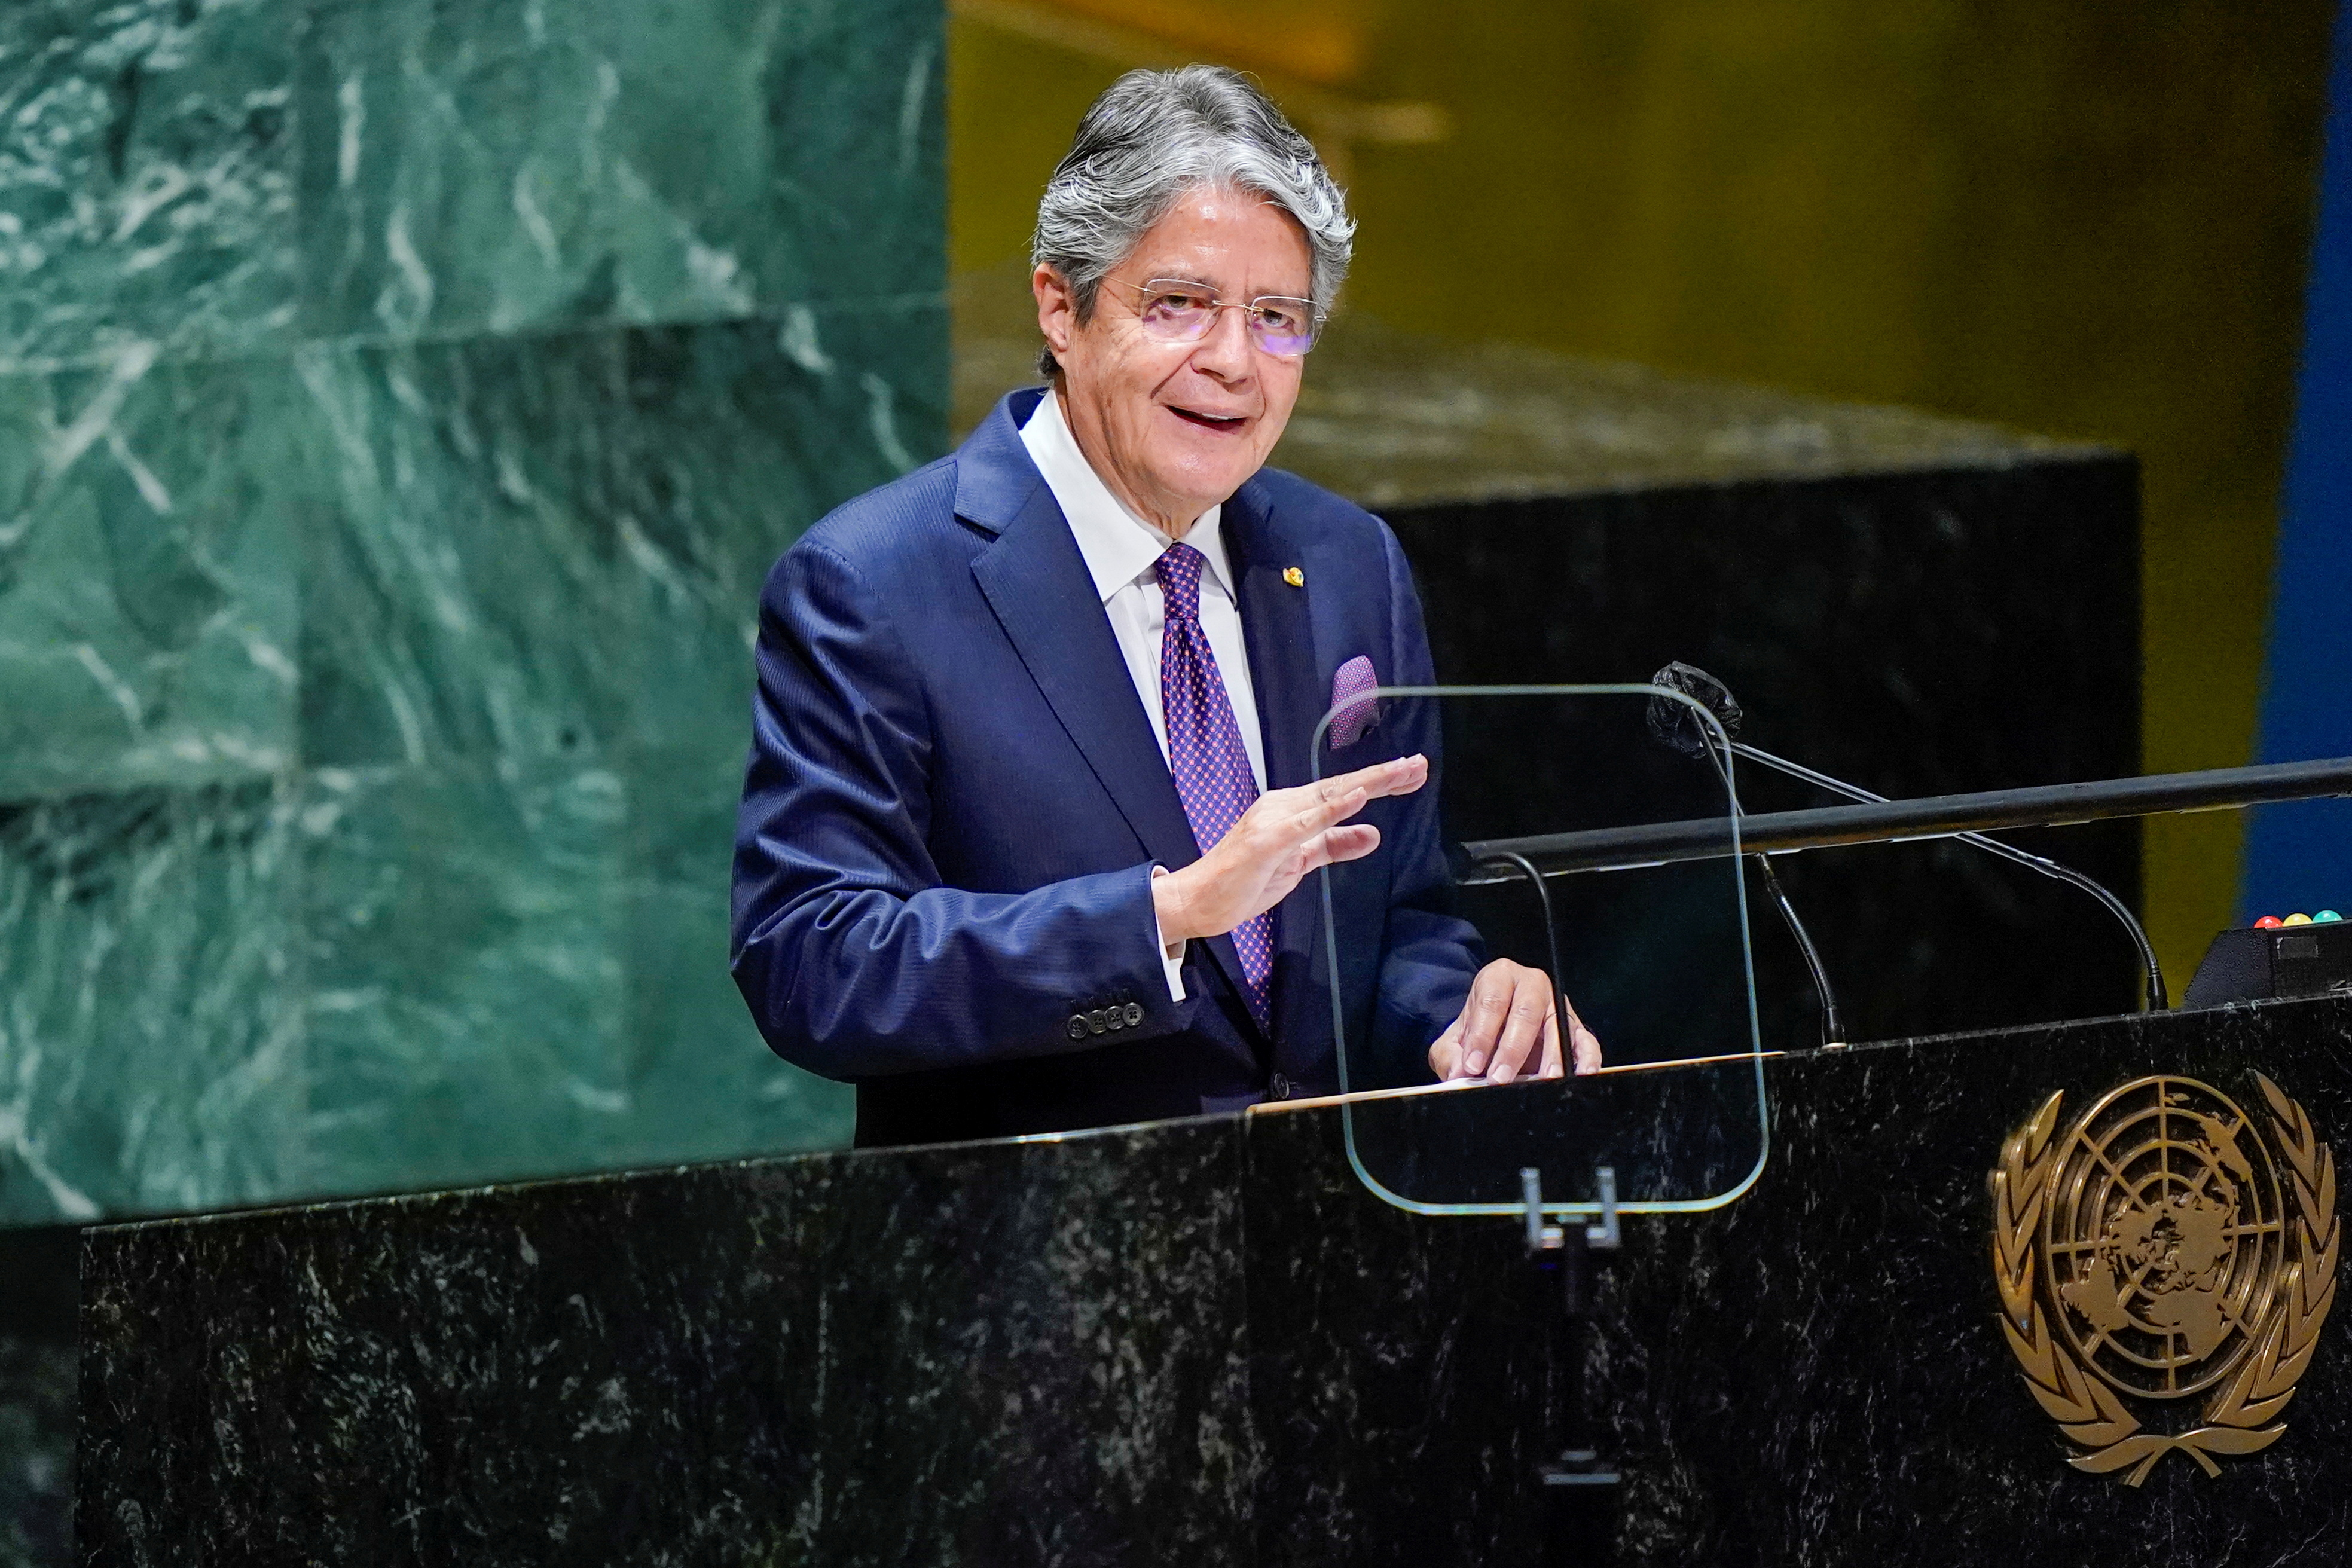 Ecuador's President Guillermo Lasso addresses the 76th Session of the United Nations General Assembly at the U.N. headquarters in New York, U.S., September 21, 2021. Mary Altaffer/Pool via REUTERS/File Photo